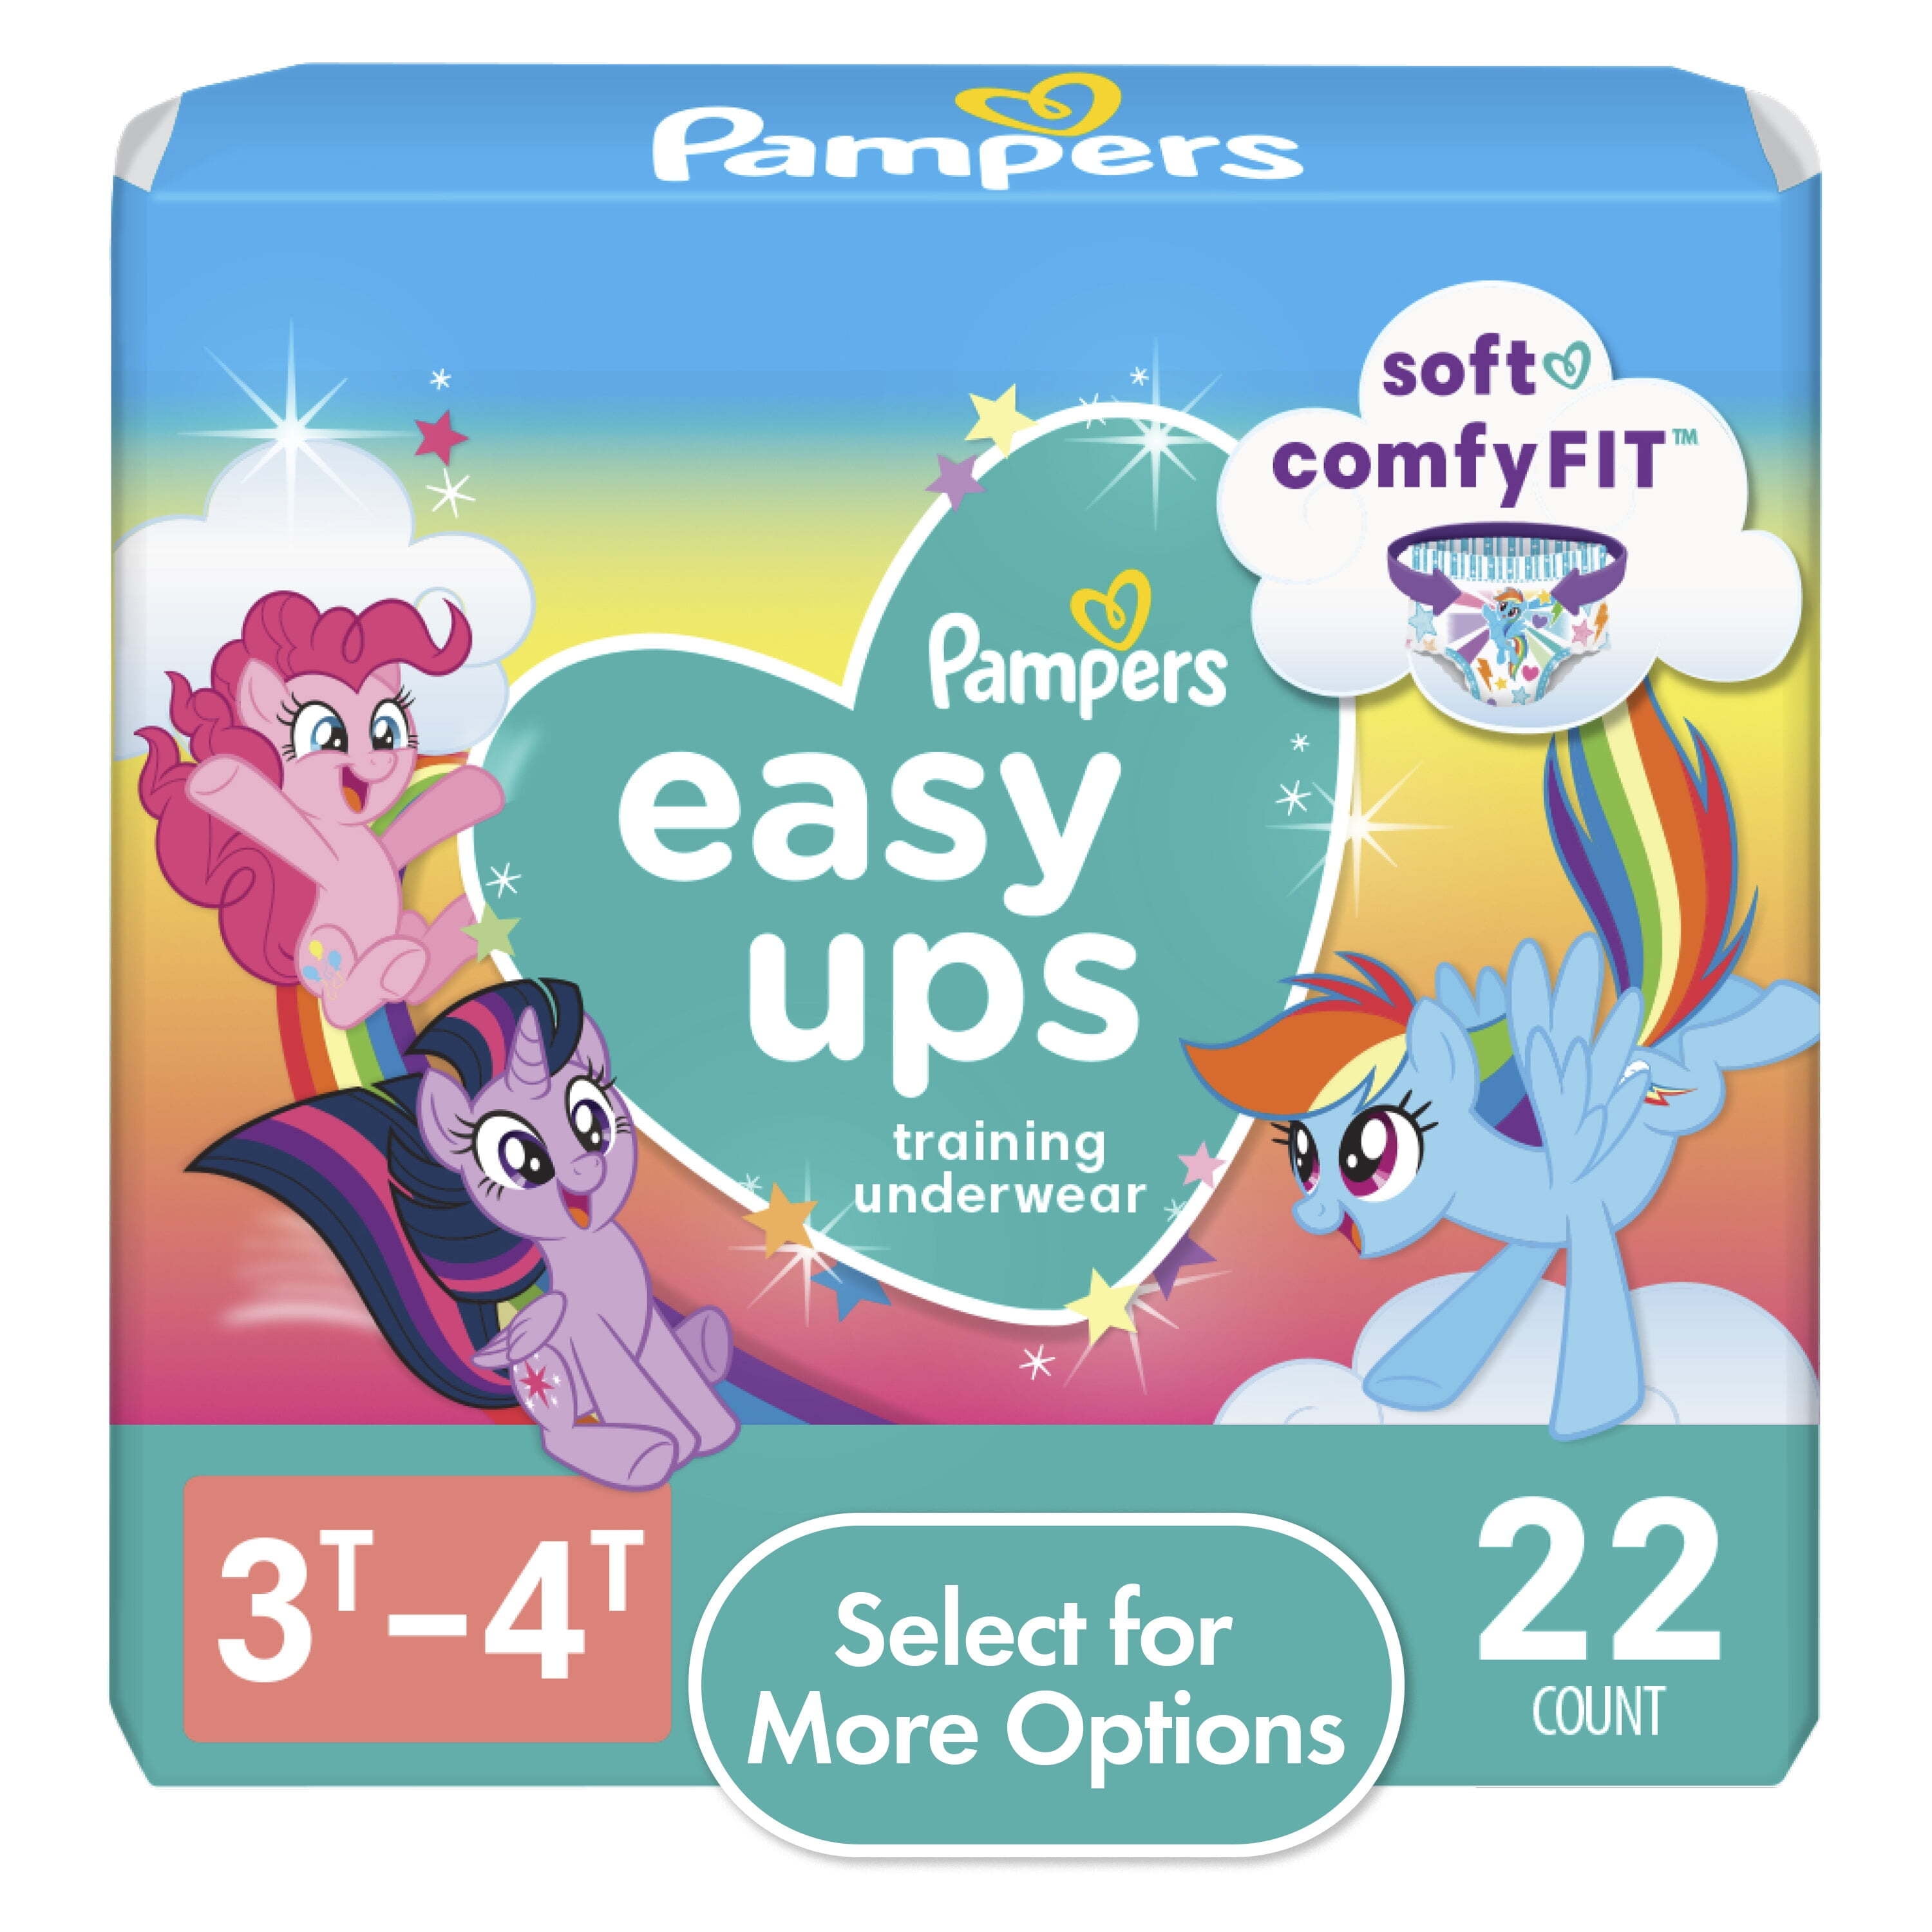 Pampers Easy Ups Girls & Boys Potty Training Pants - Size 3T-4T